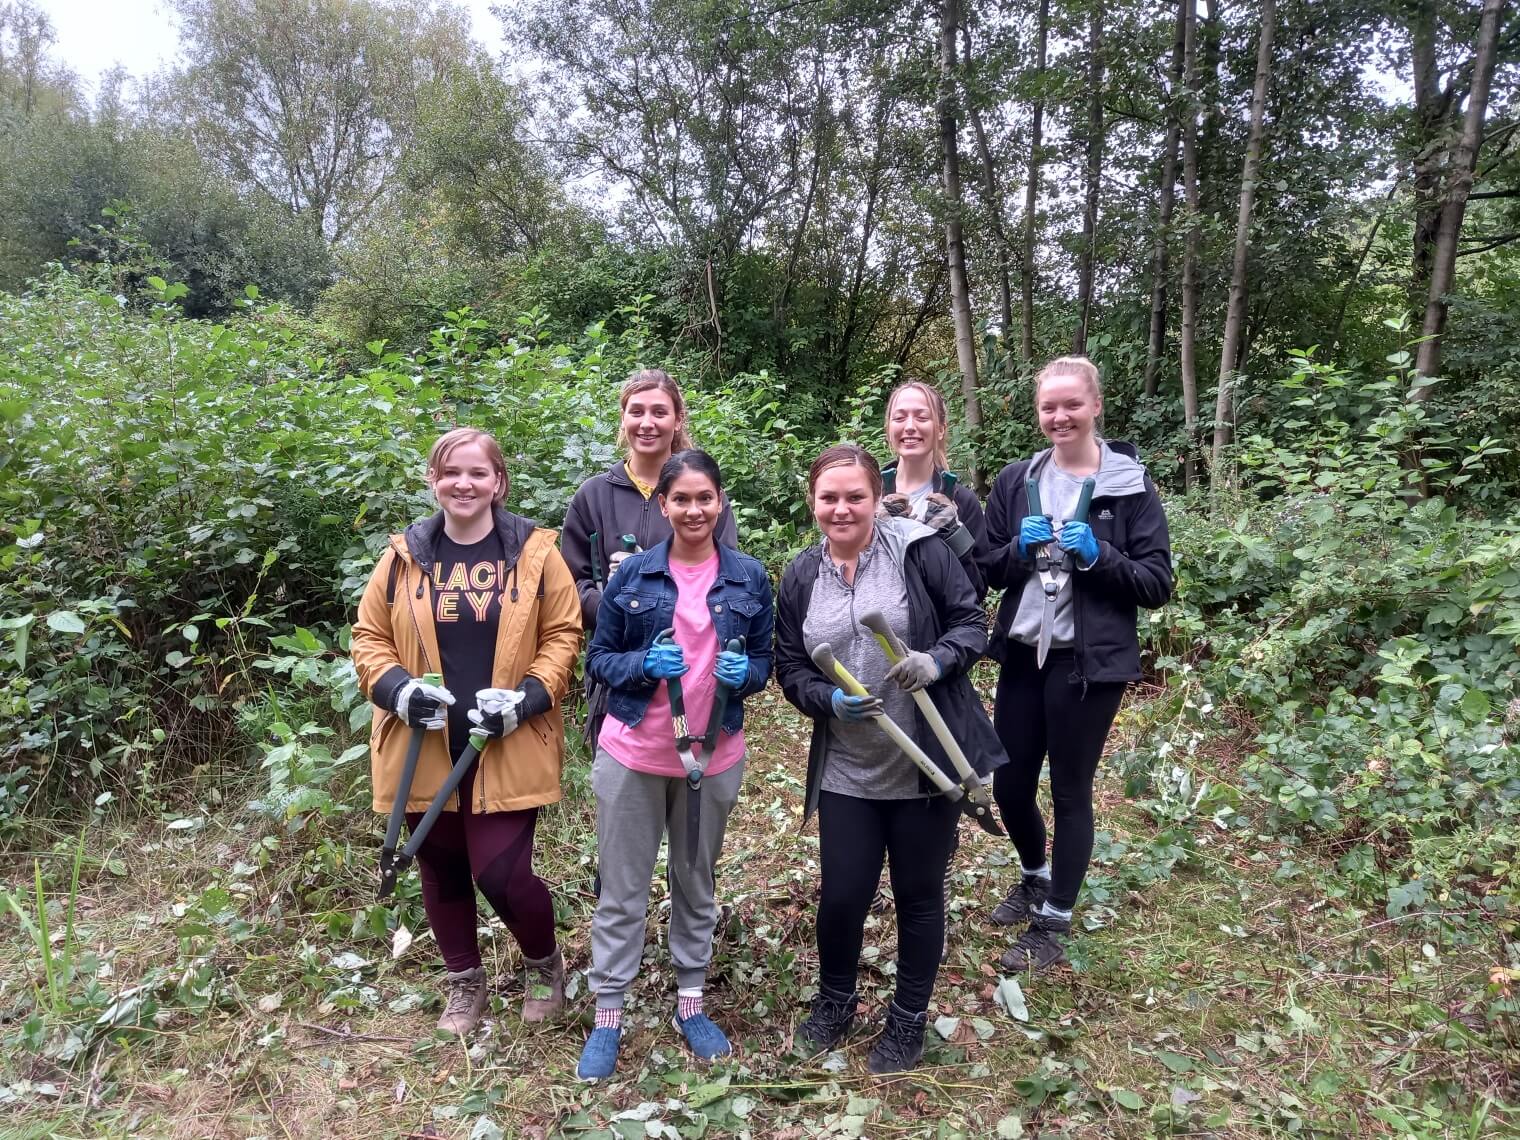 Six colleagues from People team volunteering in a woods with sheers 